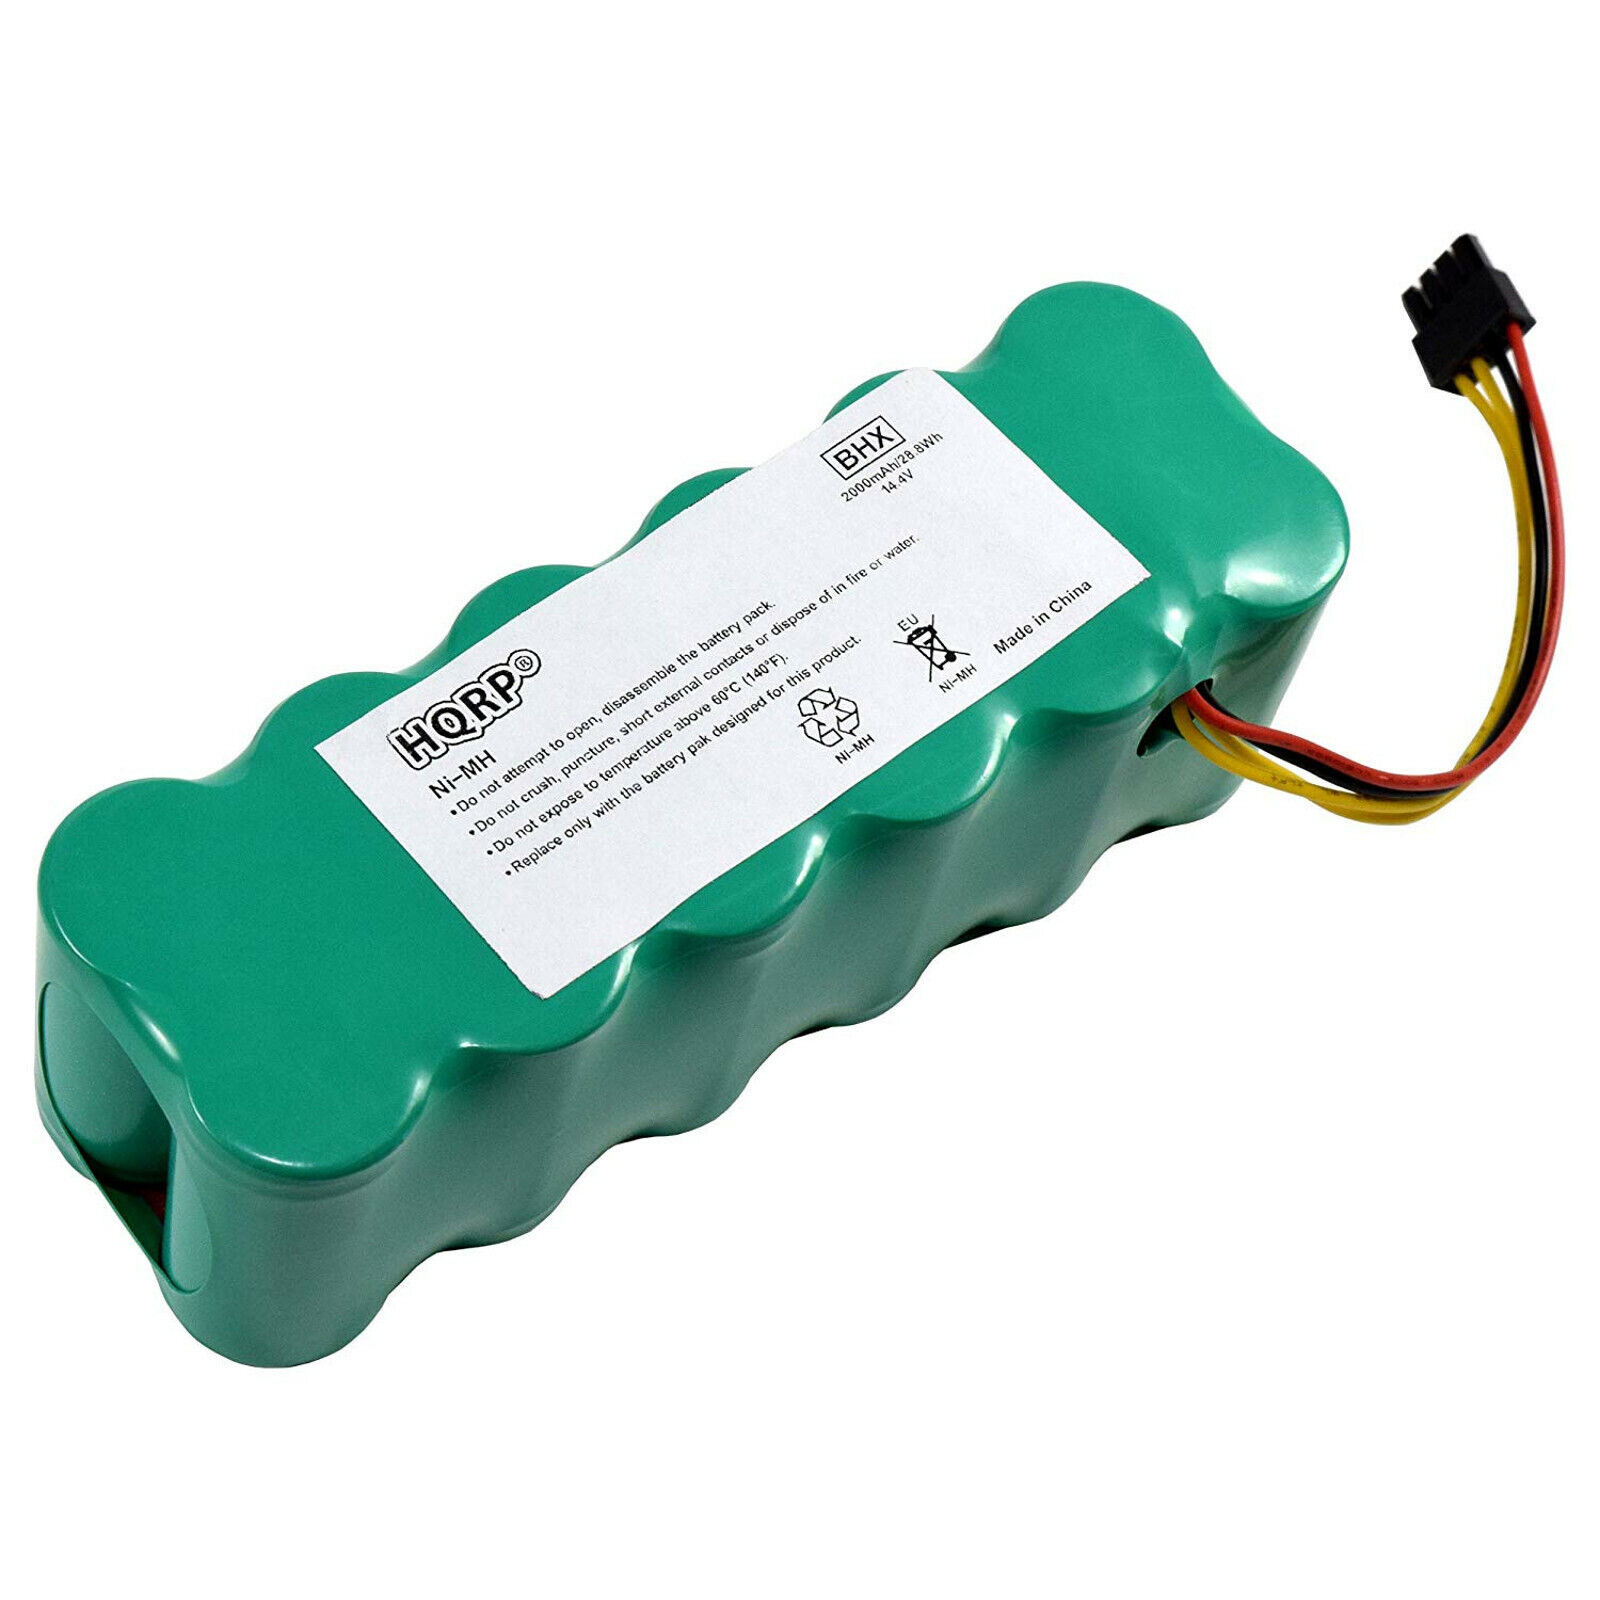 HQRP 14.4V Ni-Mh Battery for Amibot Prime, Pulse, Pure, Pure H20 Robot Vacuum